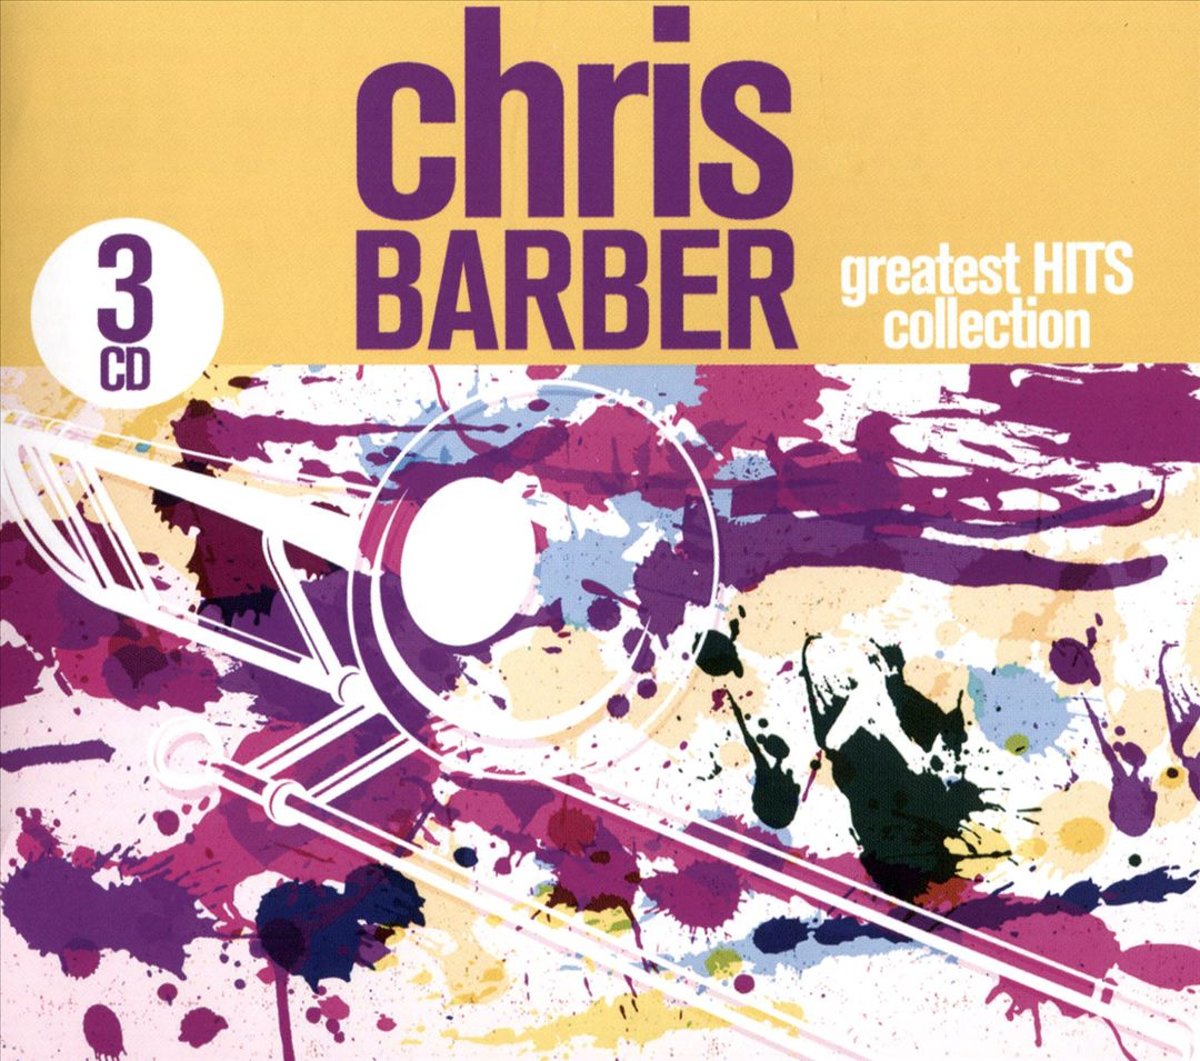 Greatest hits collection. Chris Barber. Chris Barber обложки дисков.